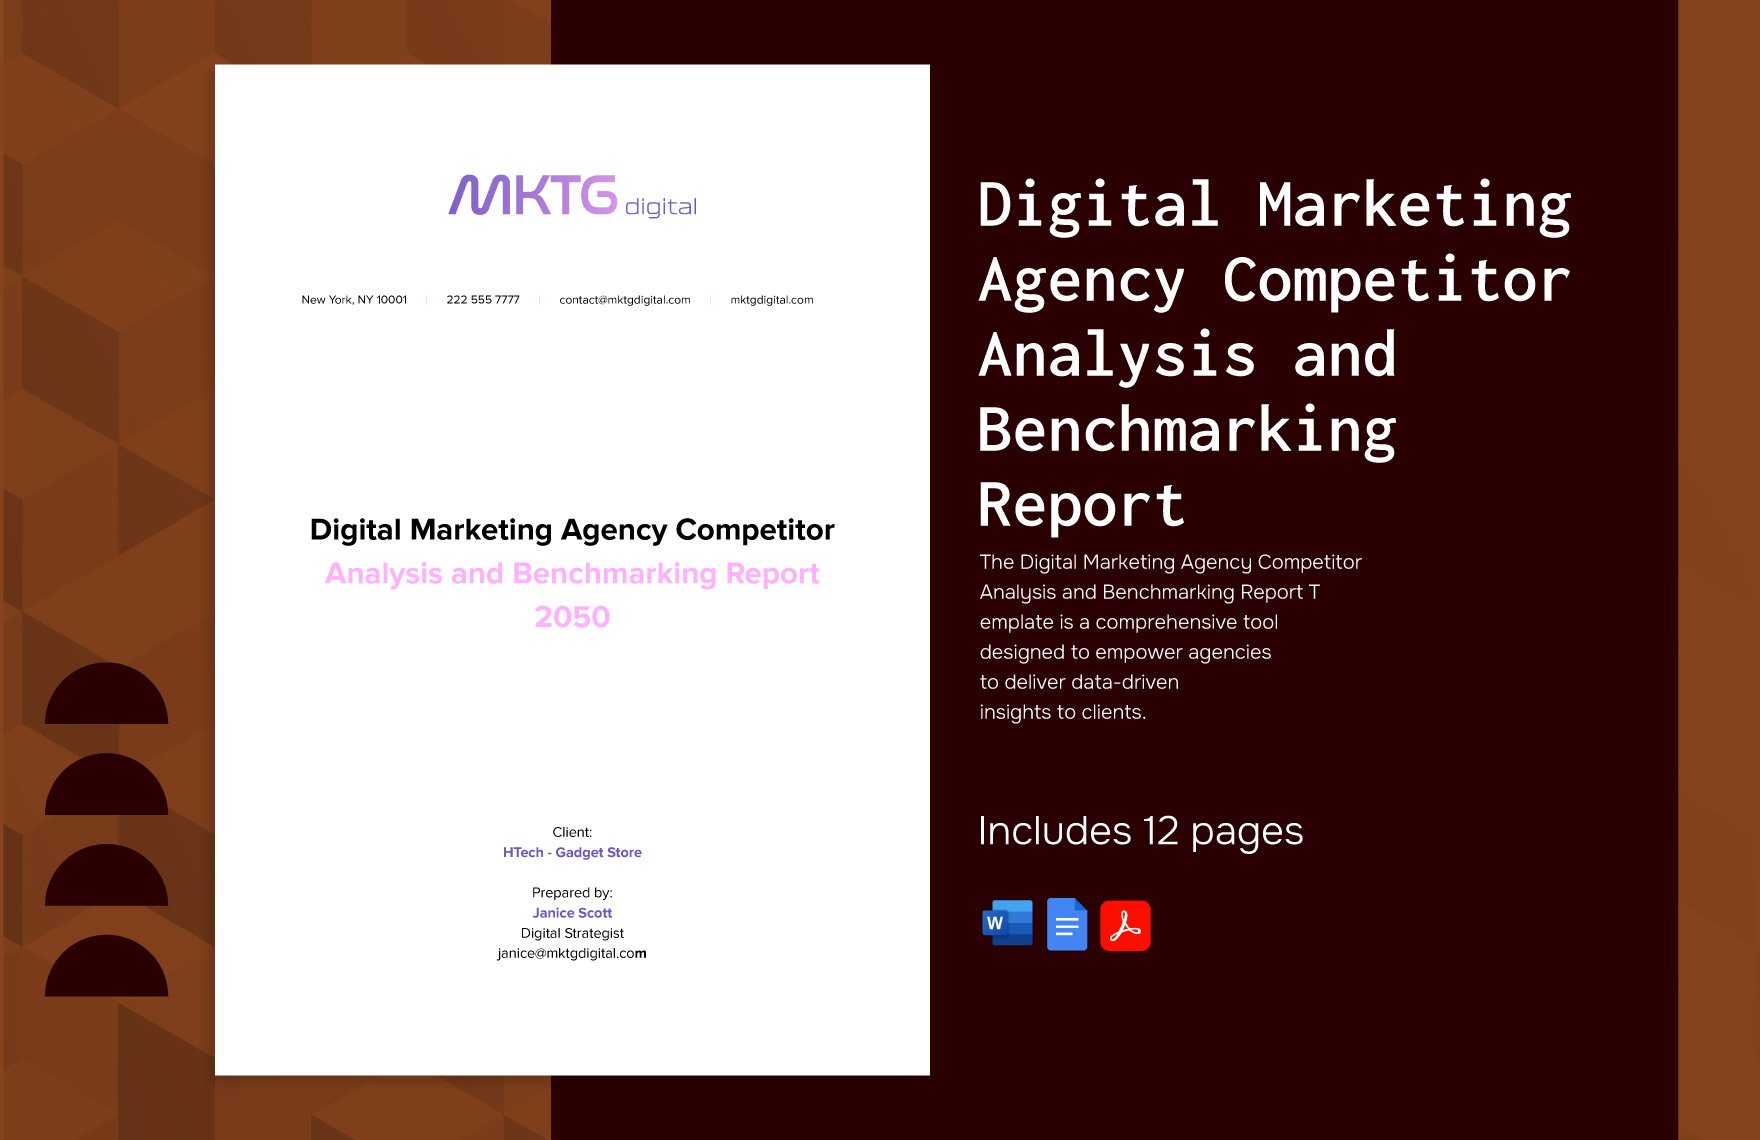 Digital Marketing Agency Competitor Analysis and Benchmarking Report Template